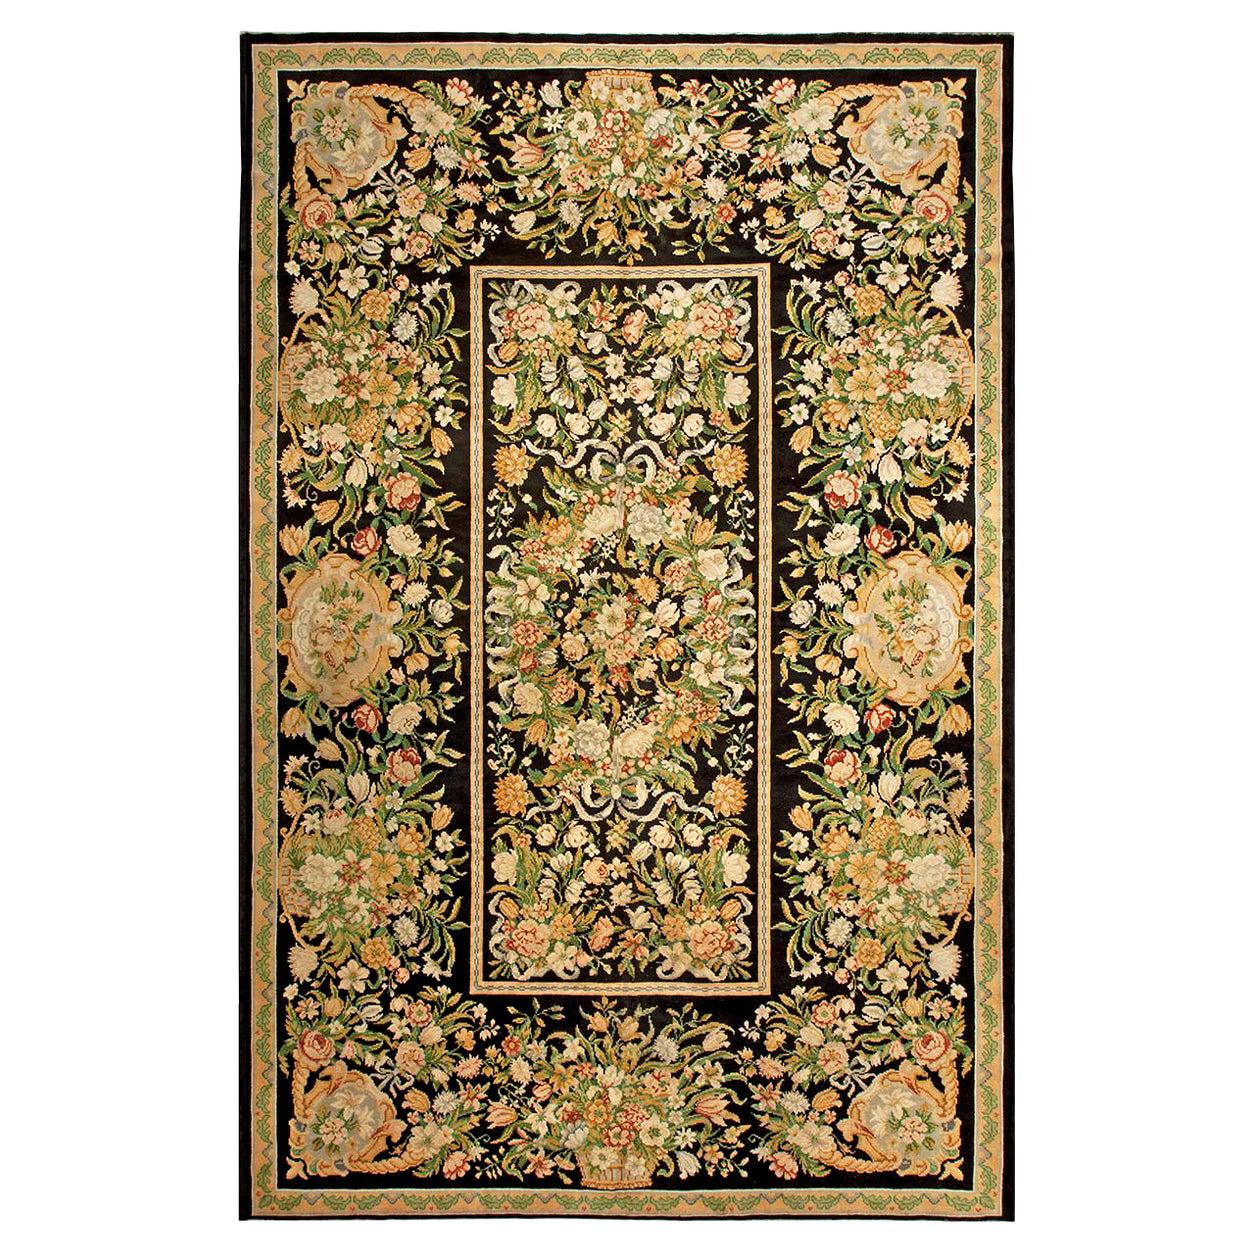 Early 20th Century French Savonnerie Botanic Handmade Wool Rug For Sale